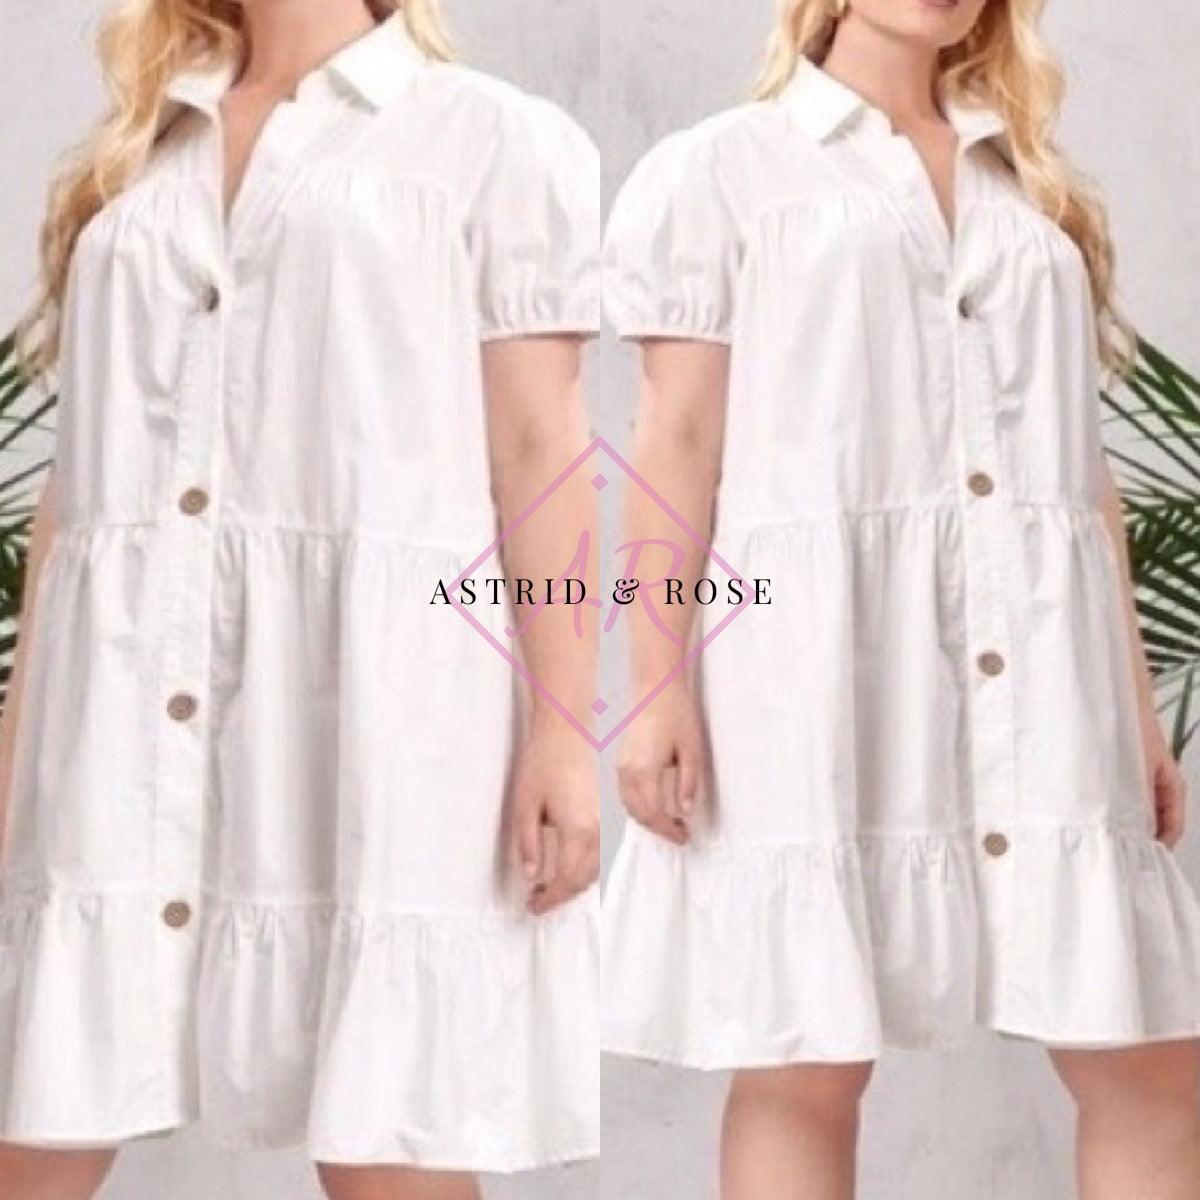 Dress - Taylor in White (PREORDER) - Astrid & Rose